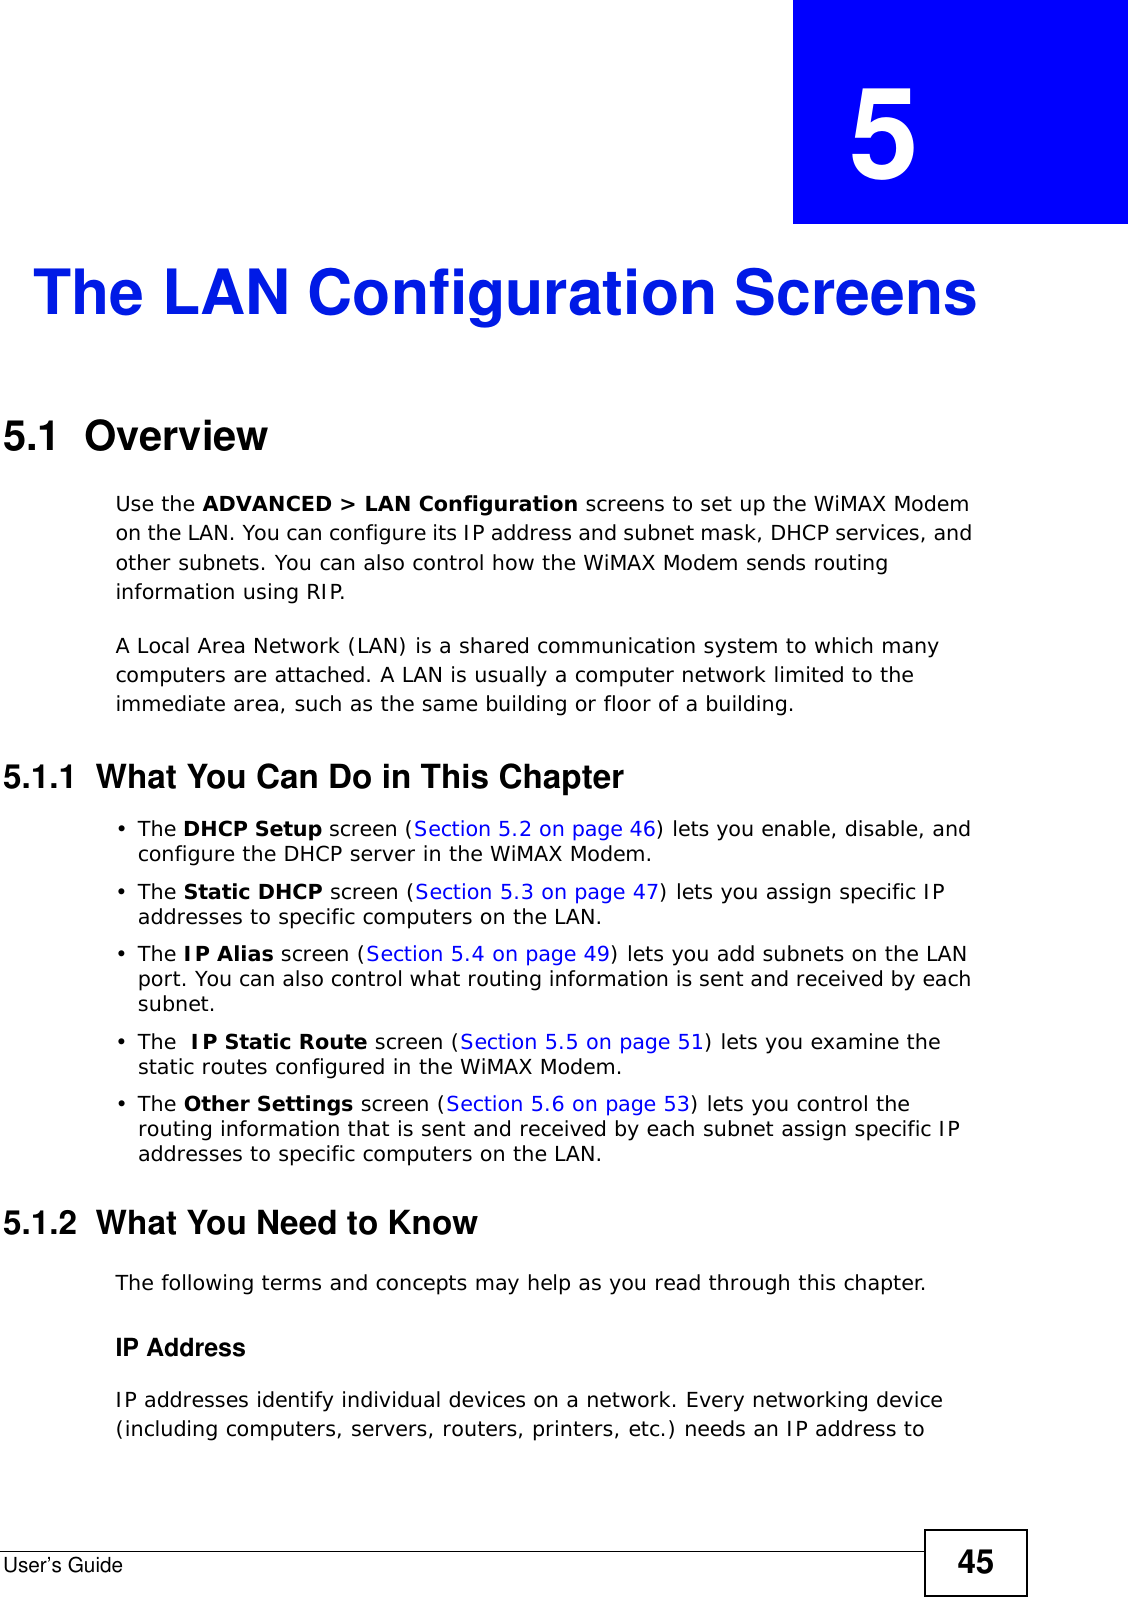 User’s Guide 45CHAPTER  5 The LAN Configuration Screens5.1  OverviewUse the ADVANCED &gt; LAN Configuration screens to set up the WiMAX Modem on the LAN. You can configure its IP address and subnet mask, DHCP services, and other subnets. You can also control how the WiMAX Modem sends routing information using RIP.A Local Area Network (LAN) is a shared communication system to which many computers are attached. A LAN is usually a computer network limited to the immediate area, such as the same building or floor of a building.5.1.1  What You Can Do in This Chapter•The DHCP Setup screen (Section 5.2 on page 46) lets you enable, disable, and configure the DHCP server in the WiMAX Modem.•The Static DHCP screen (Section 5.3 on page 47) lets you assign specific IP addresses to specific computers on the LAN.•The IP Alias screen (Section 5.4 on page 49) lets you add subnets on the LAN port. You can also control what routing information is sent and received by each subnet.•The  IP Static Route screen (Section 5.5 on page 51) lets you examine the static routes configured in the WiMAX Modem.•The Other Settings screen (Section 5.6 on page 53) lets you control the routing information that is sent and received by each subnet assign specific IP addresses to specific computers on the LAN.5.1.2  What You Need to KnowThe following terms and concepts may help as you read through this chapter.IP AddressIP addresses identify individual devices on a network. Every networking device (including computers, servers, routers, printers, etc.) needs an IP address to 